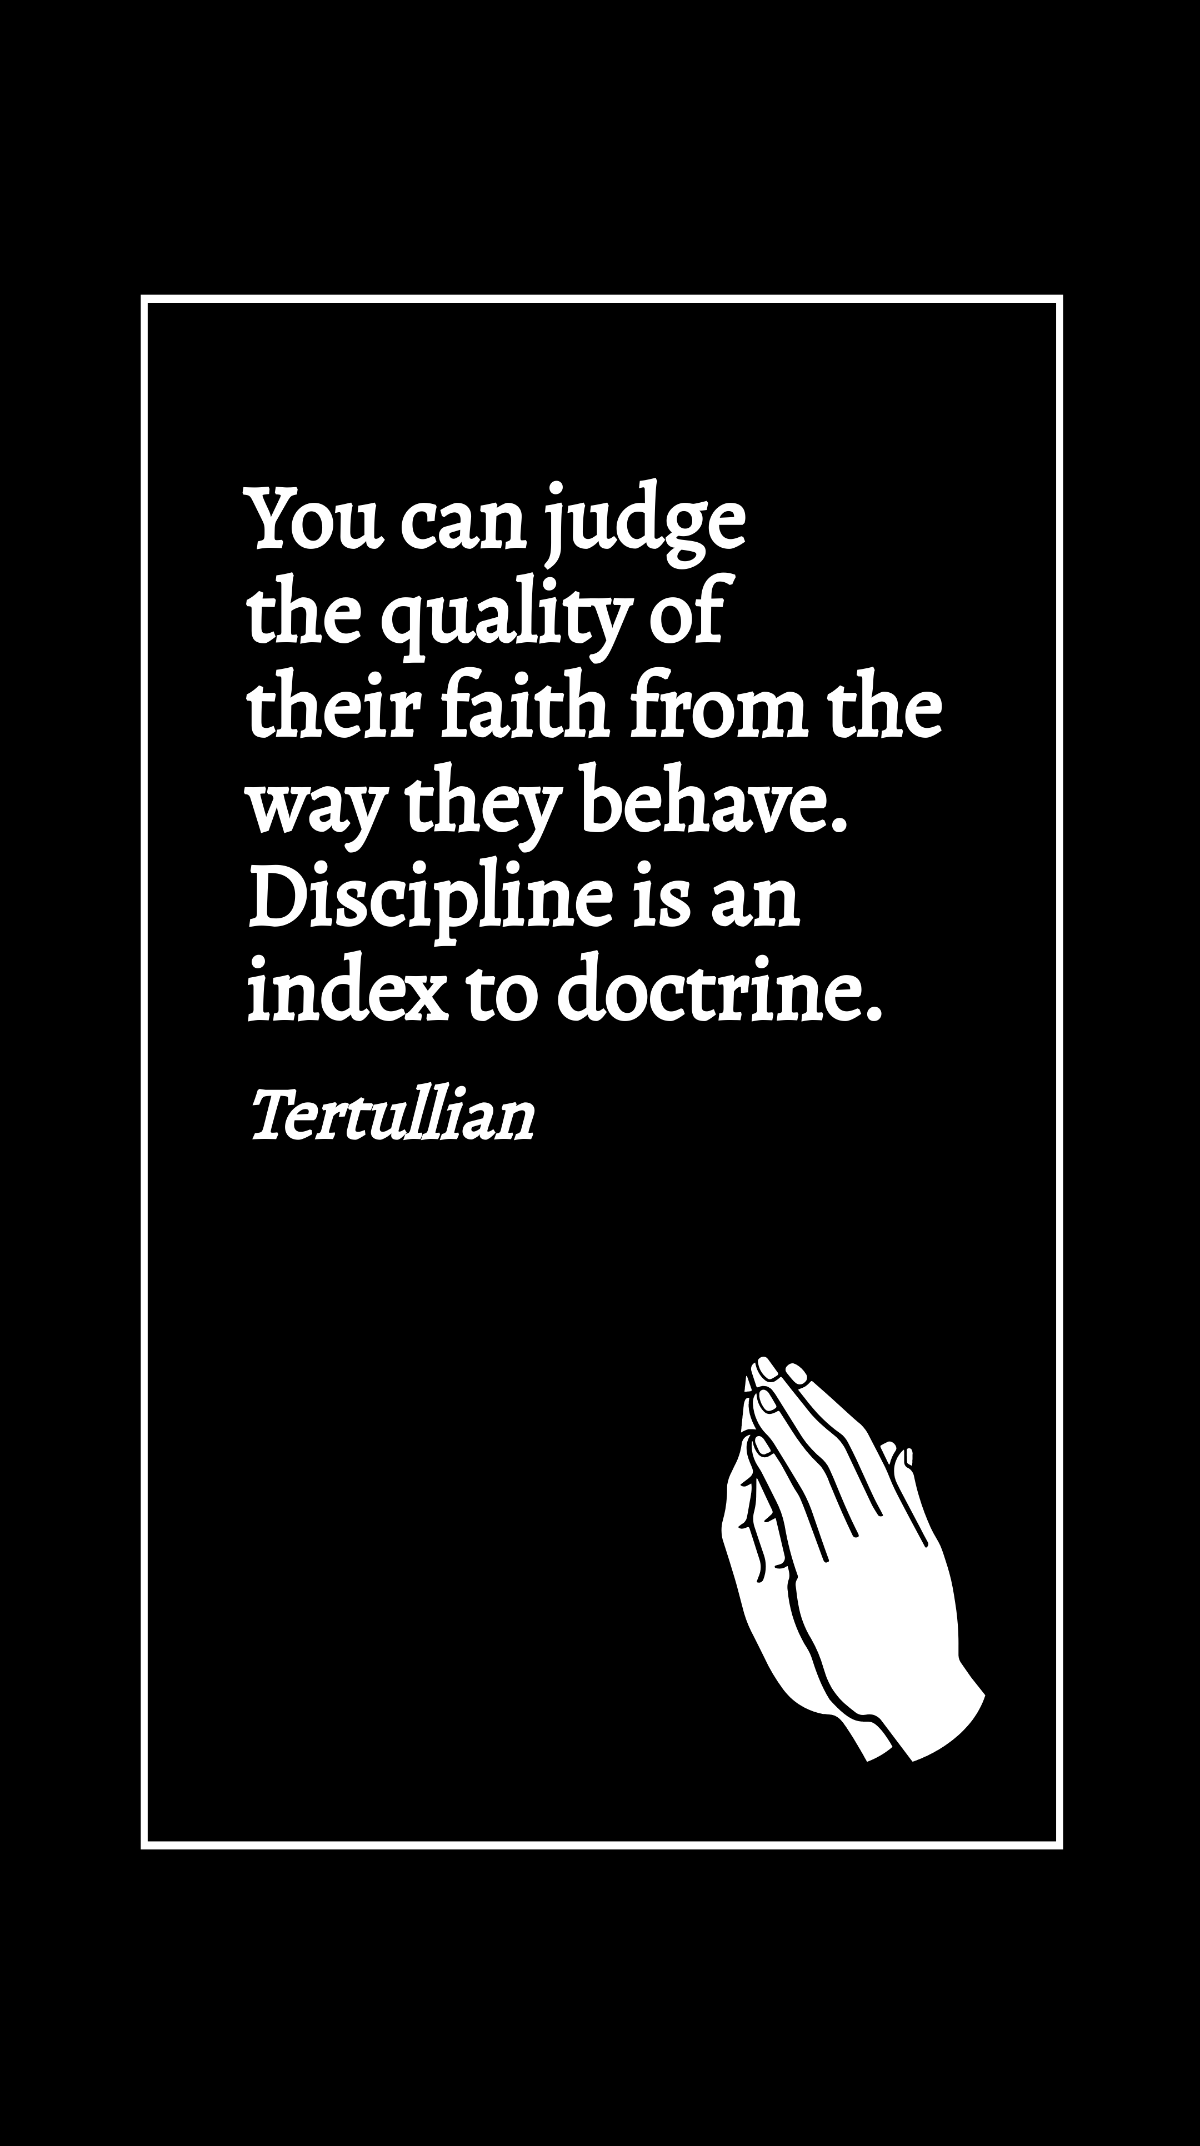 Tertullian - You can judge the quality of their faith from the way they behave. Discipline is an index to doctrine.